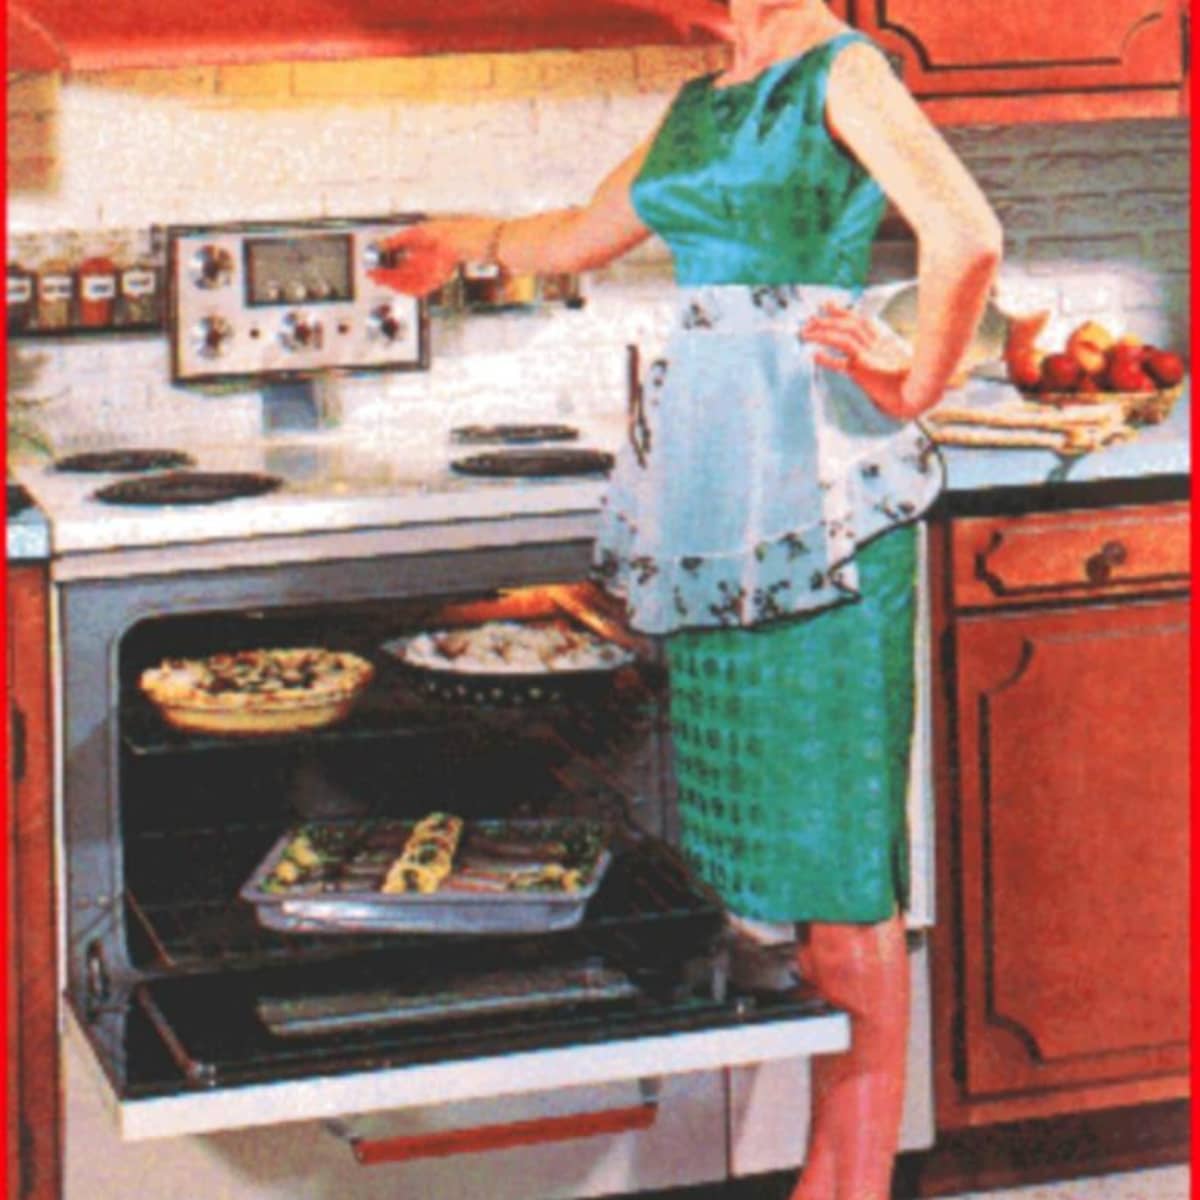 Fifties Housewife Costume Ideas for image